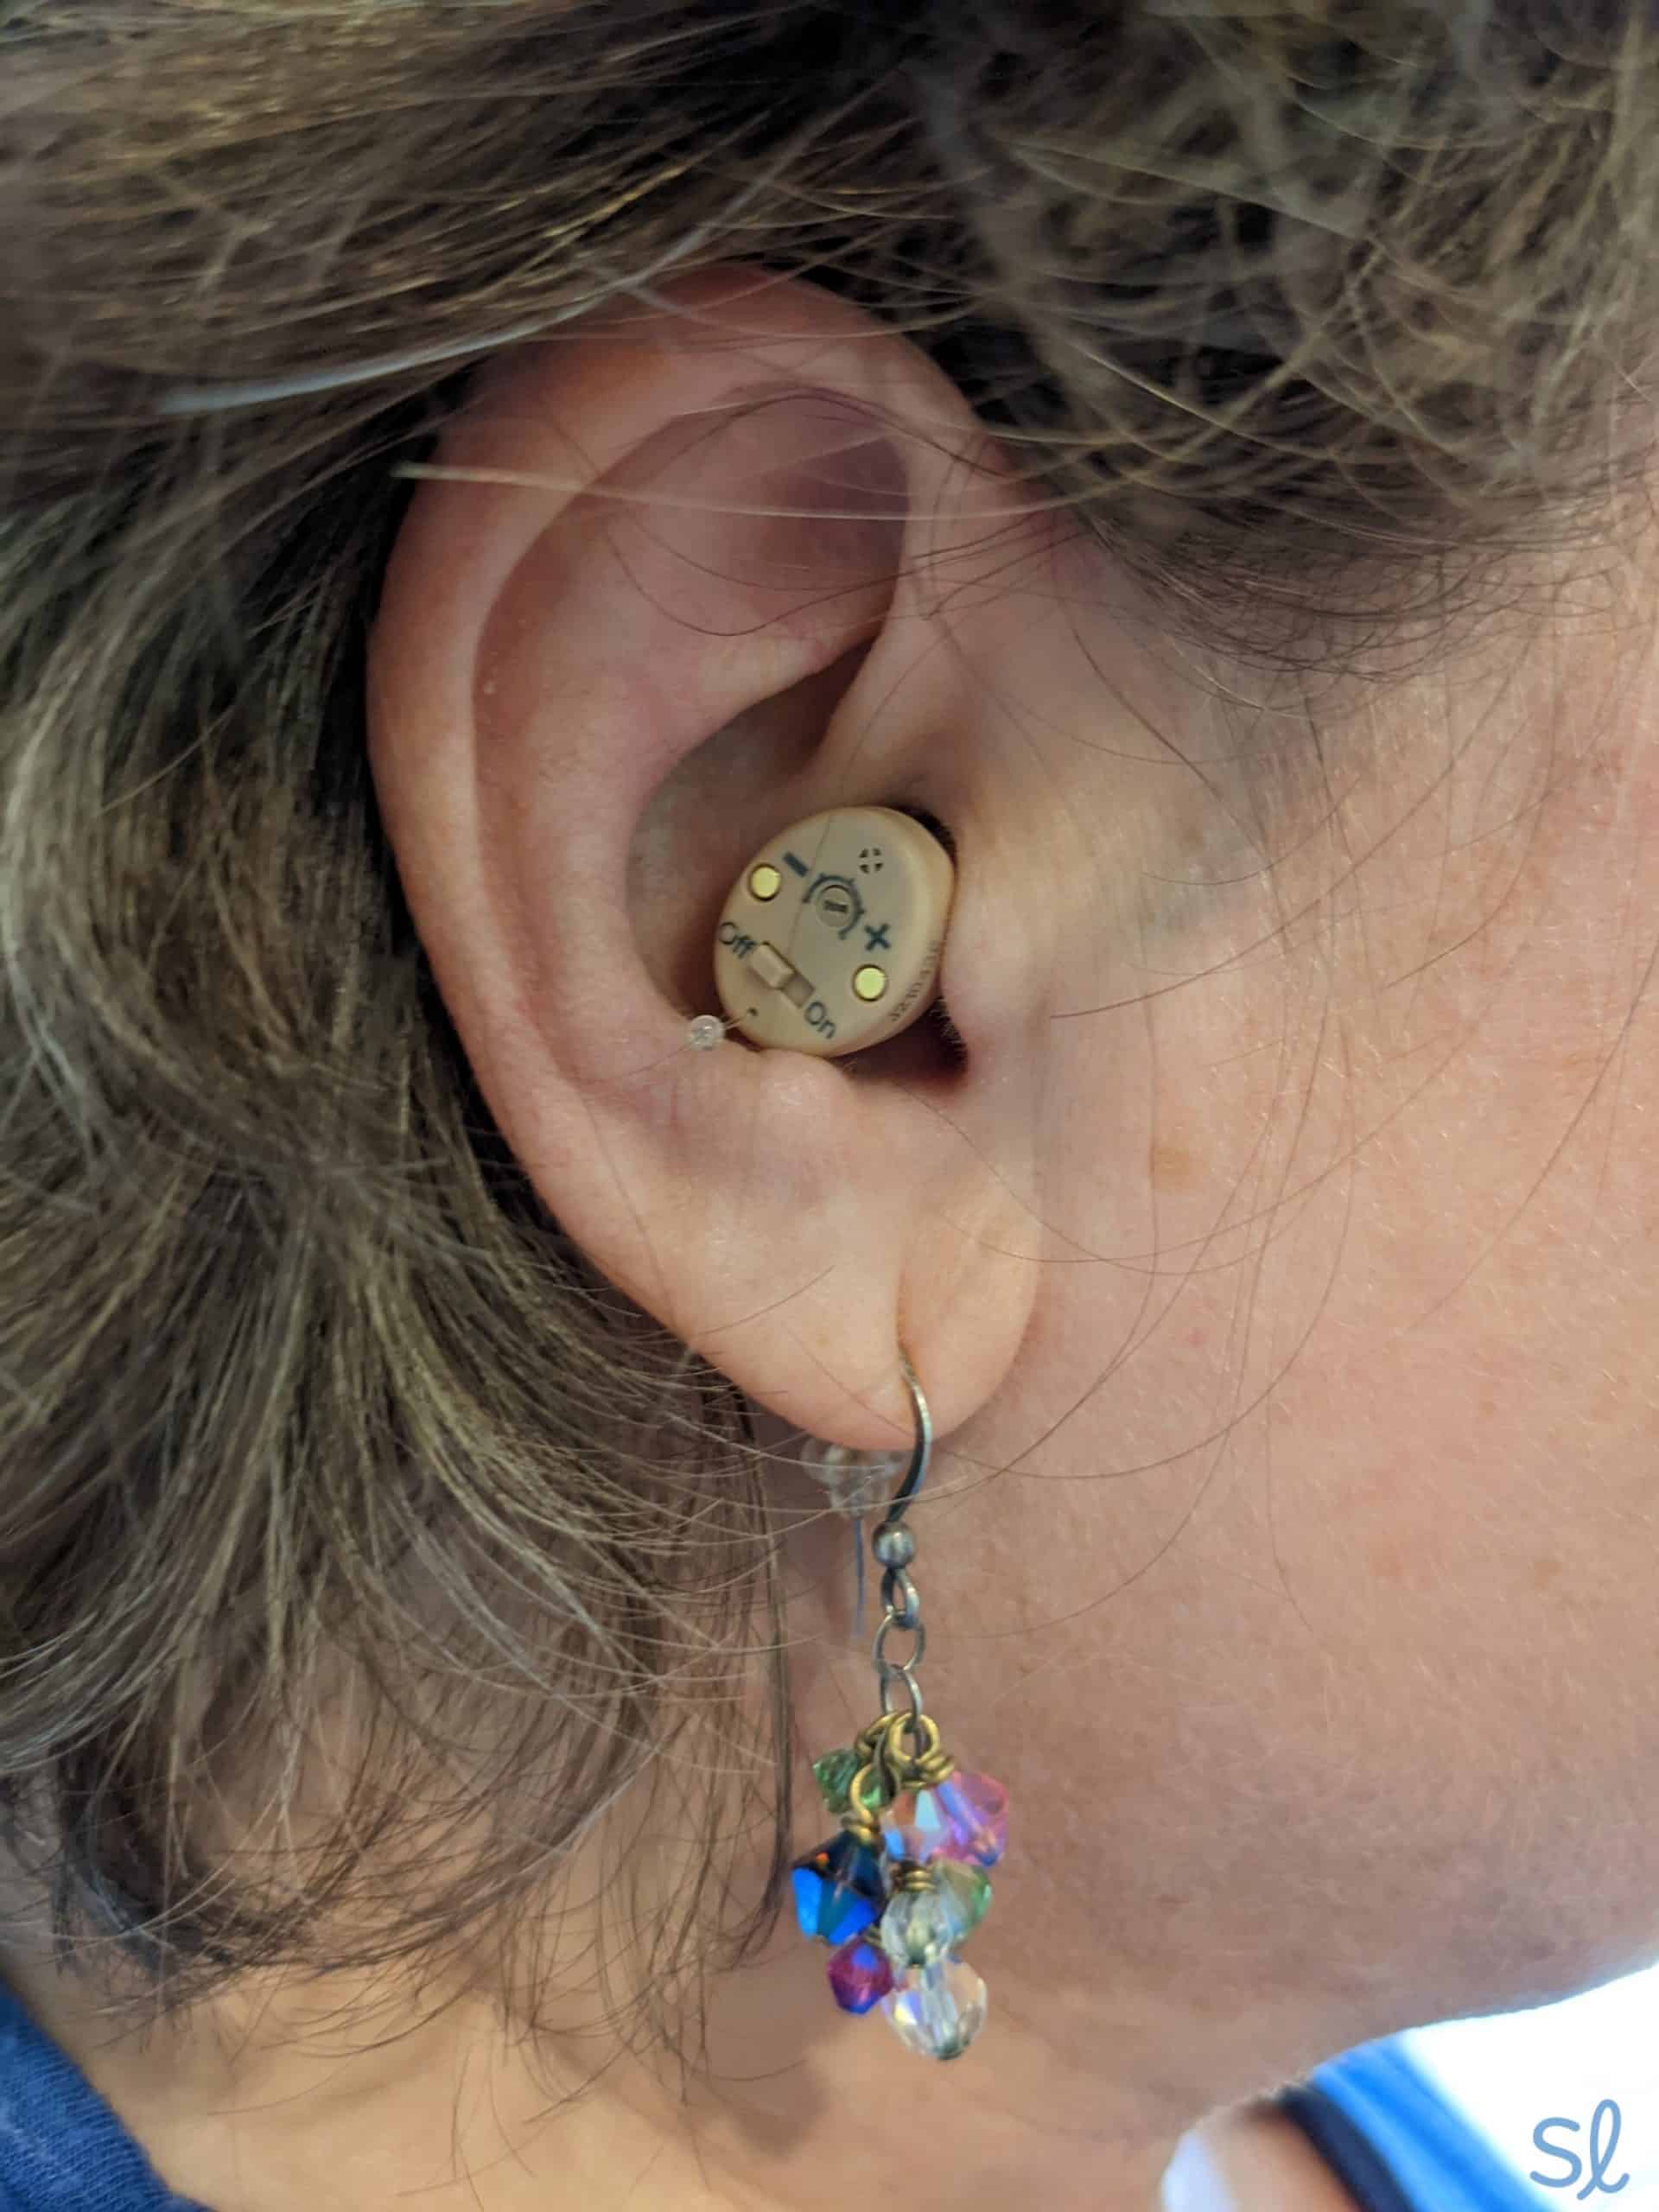 Person wearing Audien Atom hearing aids.